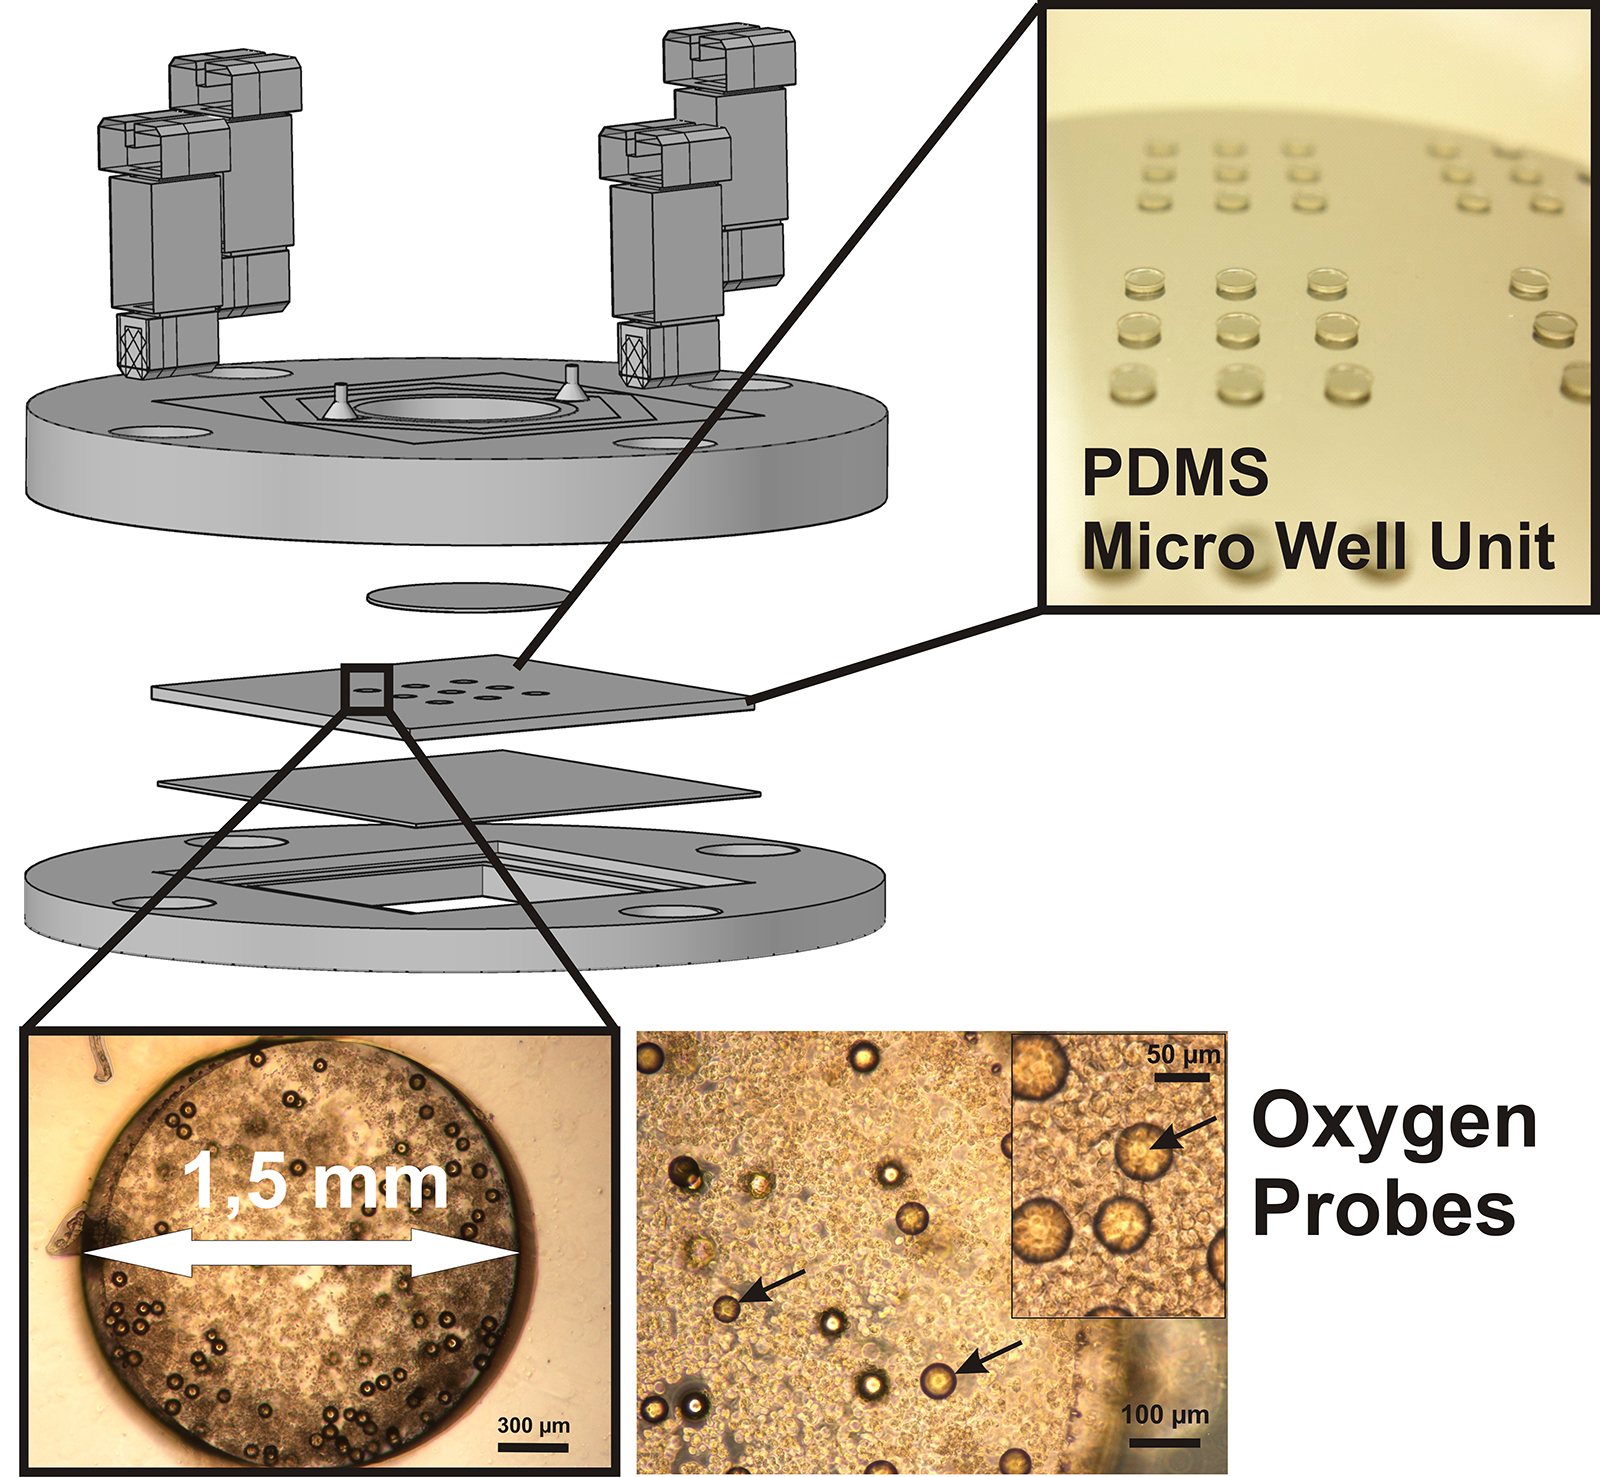 Scheme of the microfluidic bioreactor (top), and details of the wells containing microparticles (oxygen probes) and cells in the background (below).